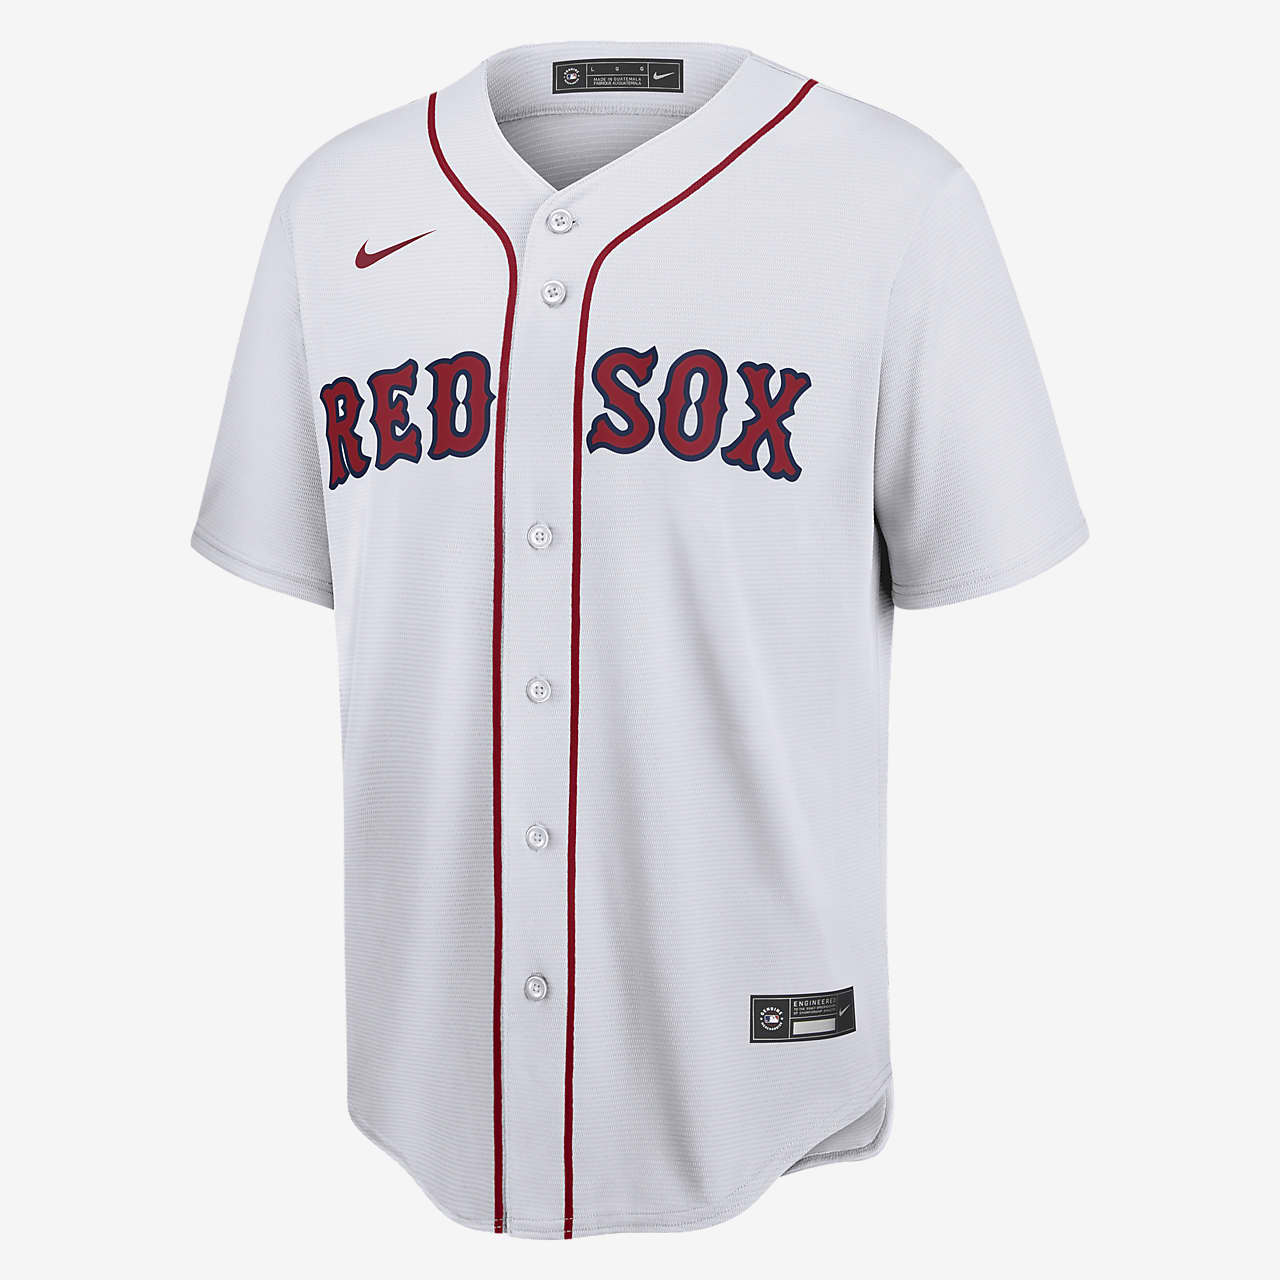 red sox new jersey